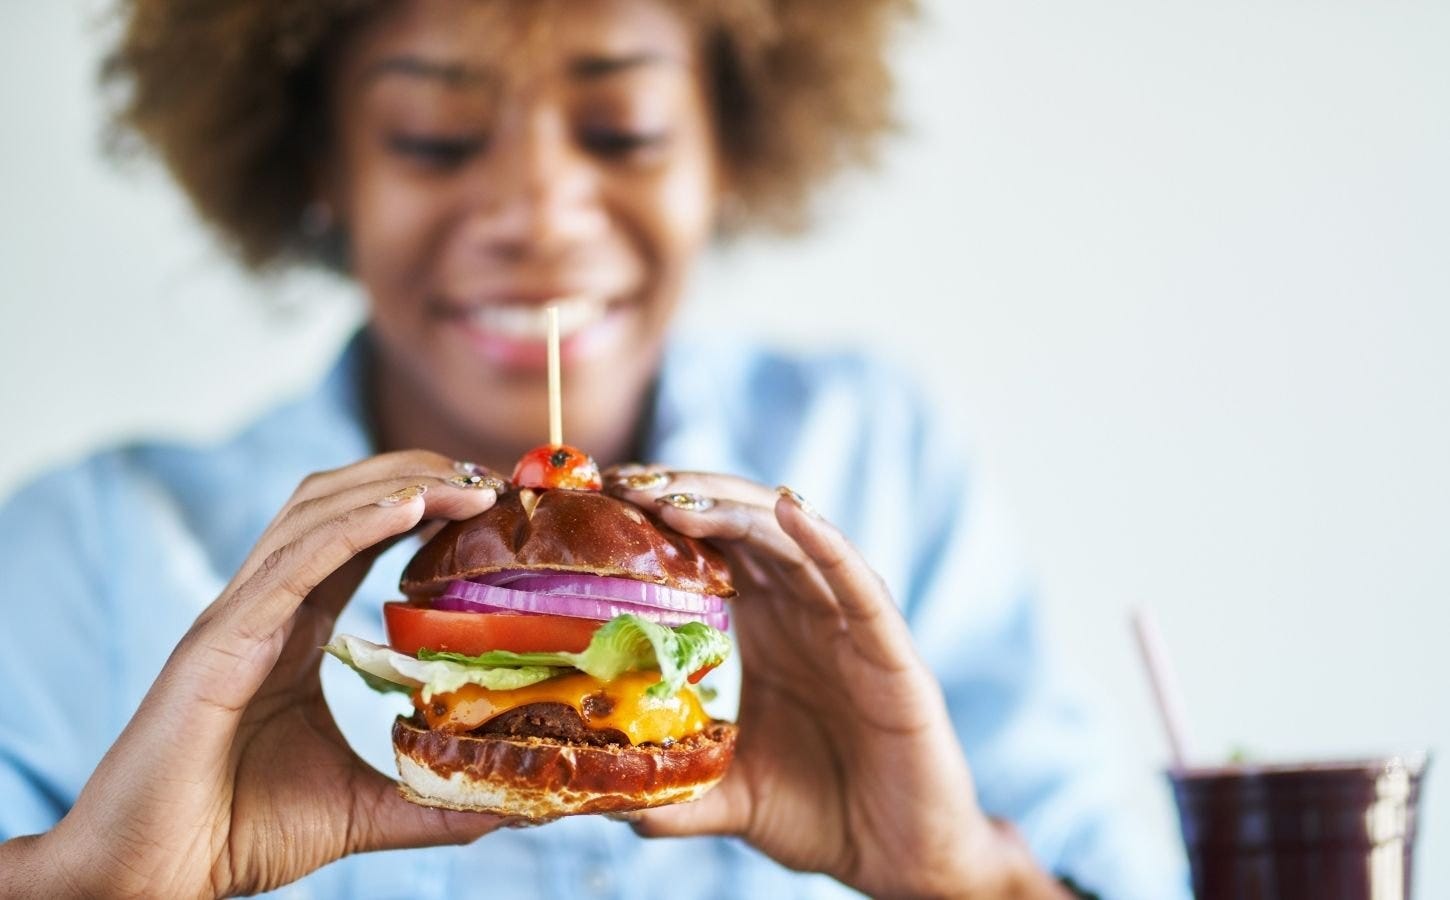 UK Vegan Population Increased By 1 Million In A Year, Study Finds